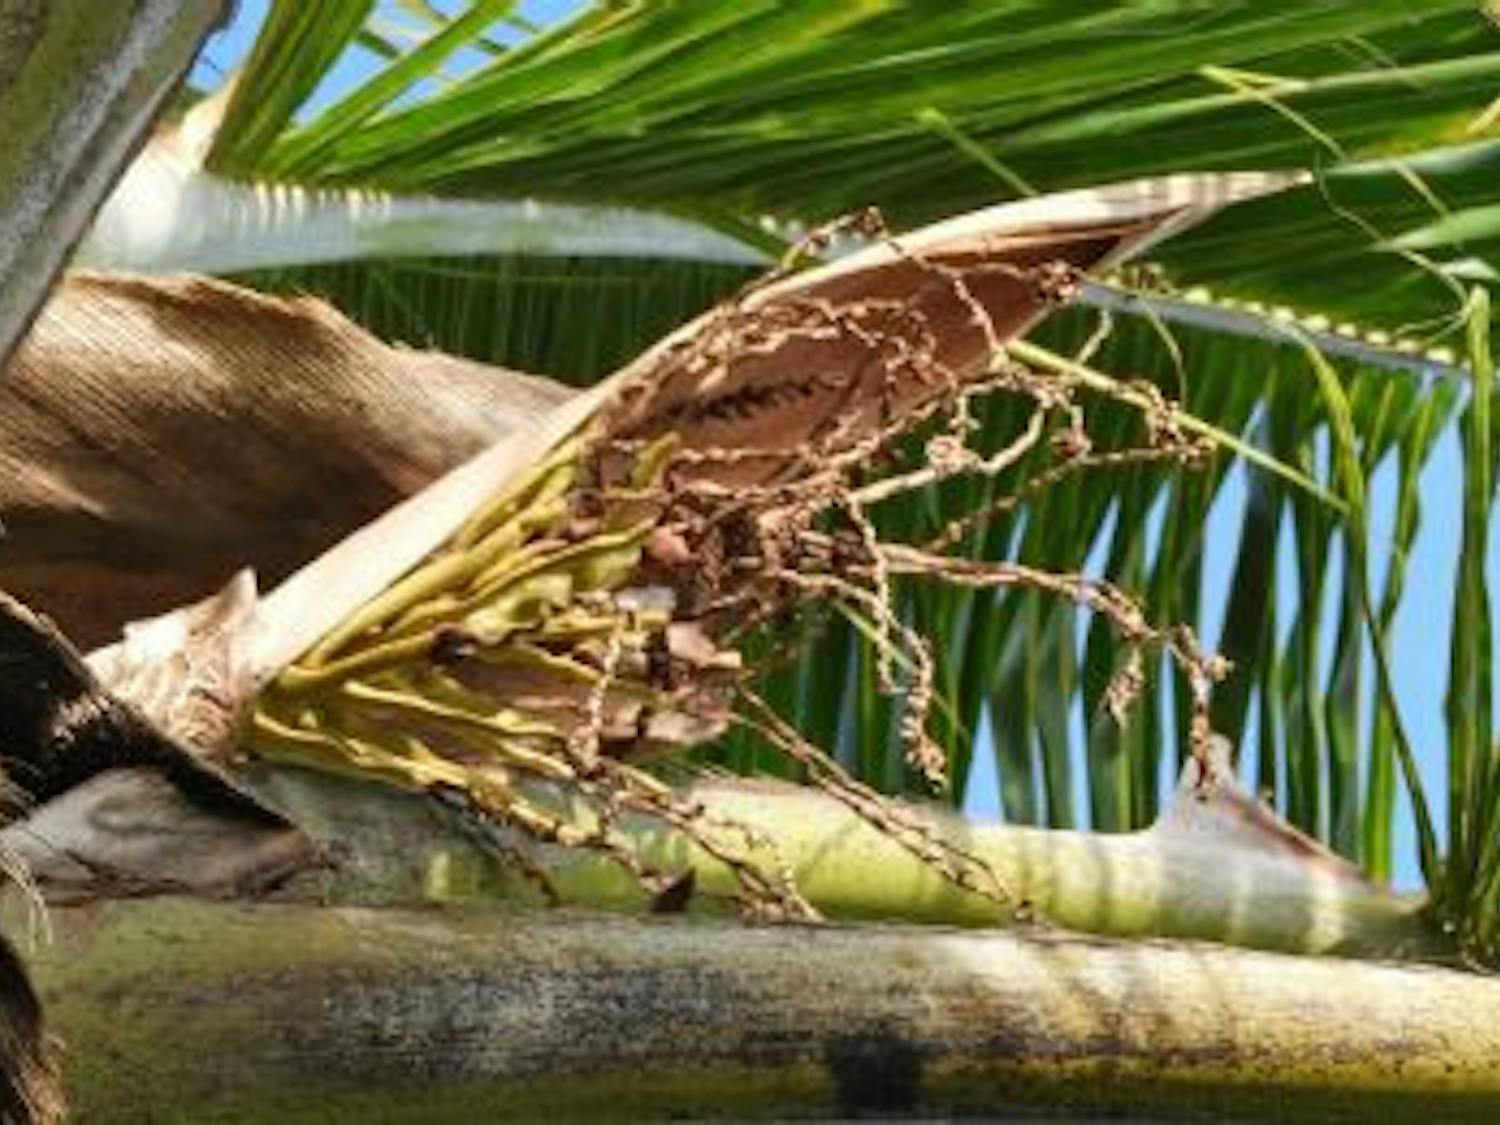 This palm frond is from a tree infected with Lethal Bronzing Disease. Symptoms of the disease include fruit dropping prematurely and fronds wilting and losing color.&nbsp;